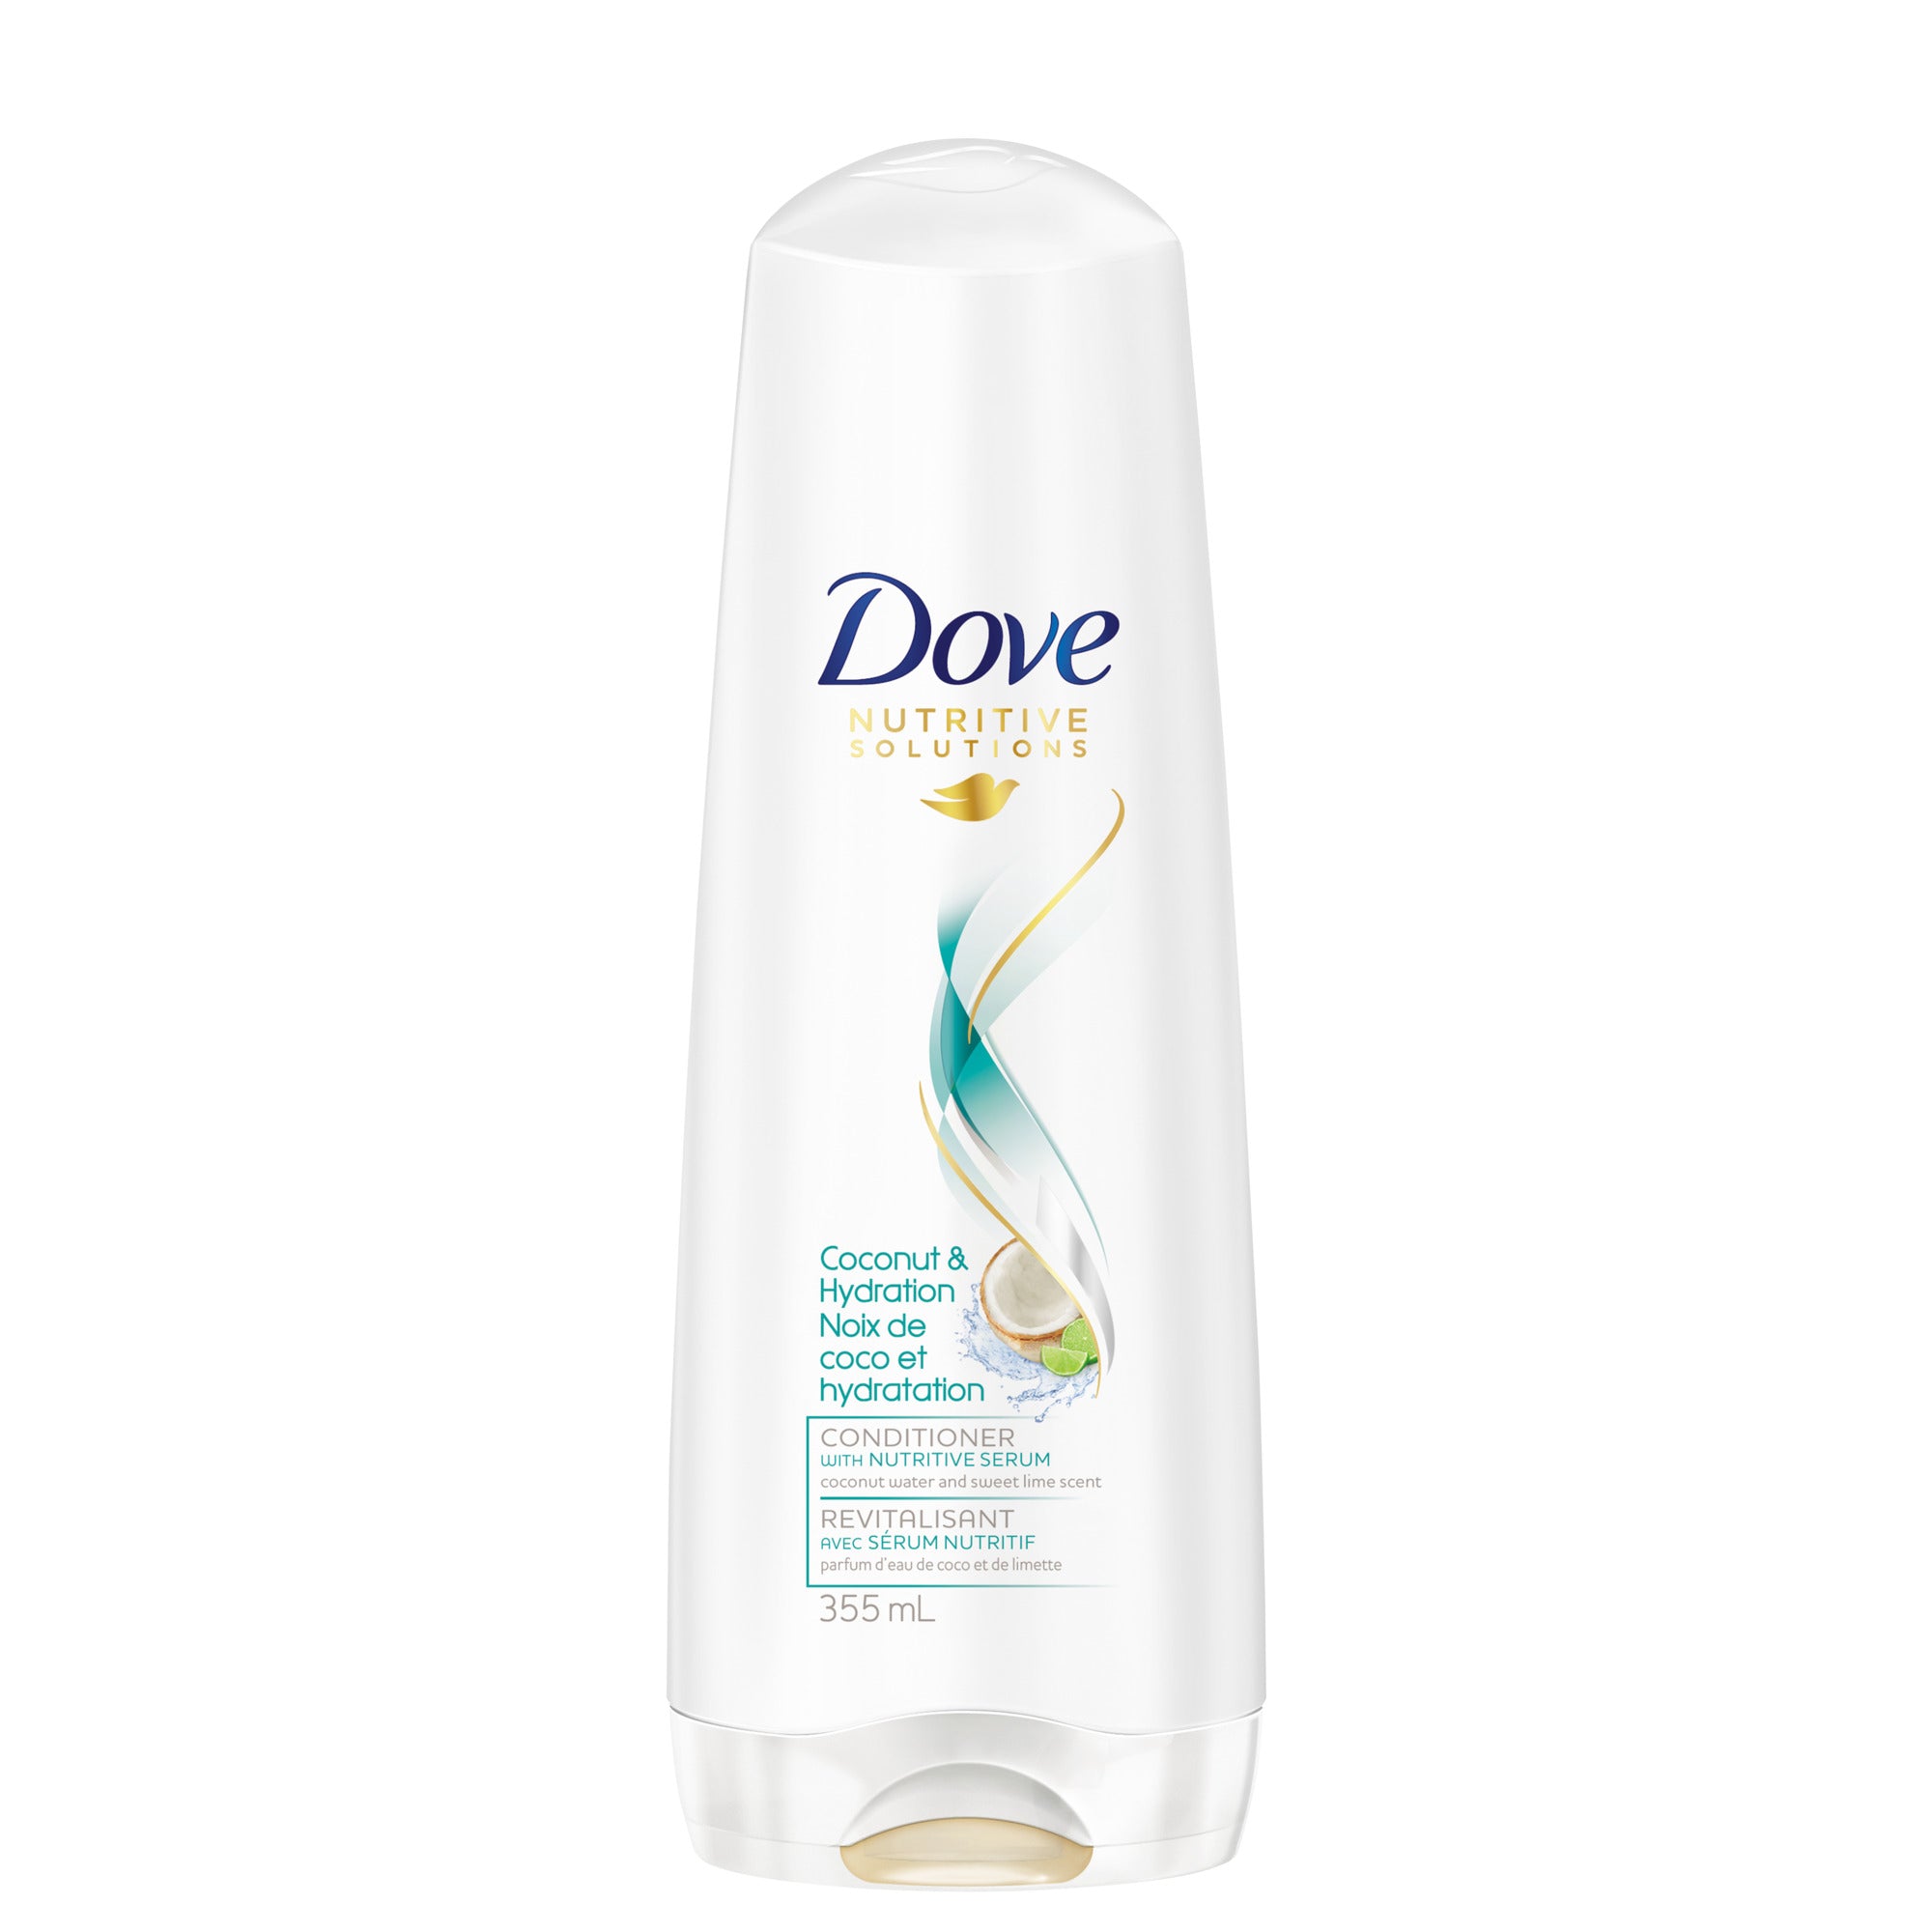 Showing the front angle view of the Dove Coconut + Hydration Conditioner 355mL product.